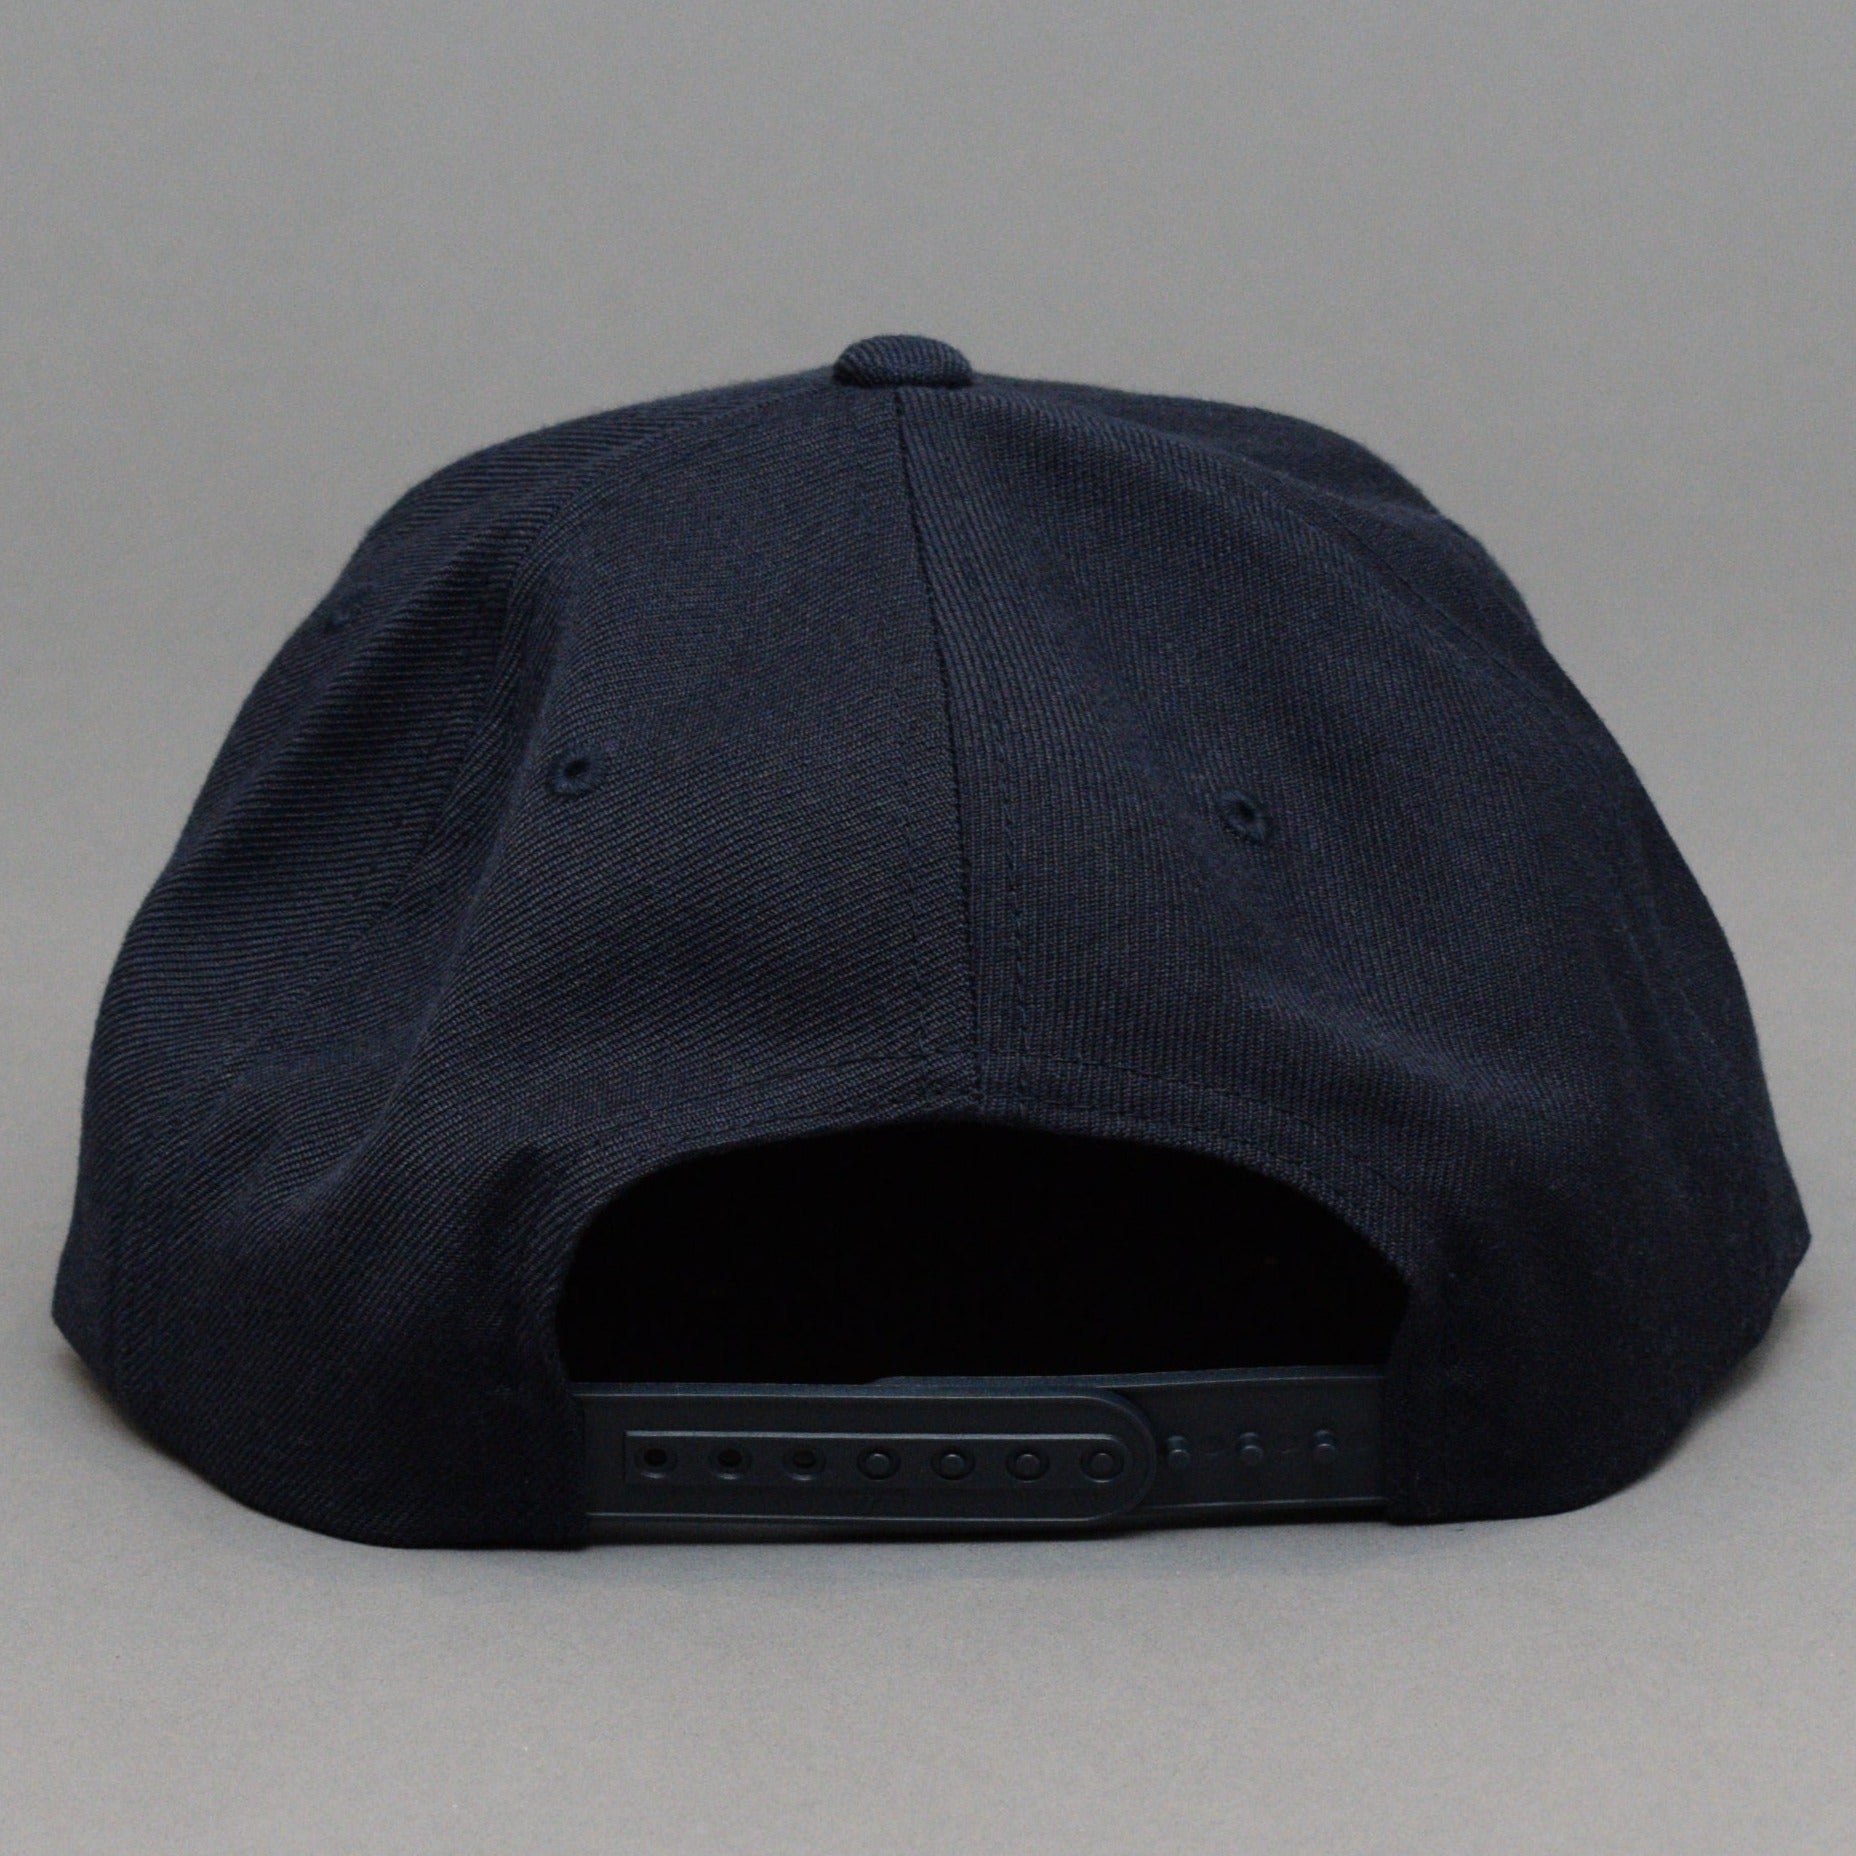 Ideal - Cities Pack Berlin - Snapback - Navy/White